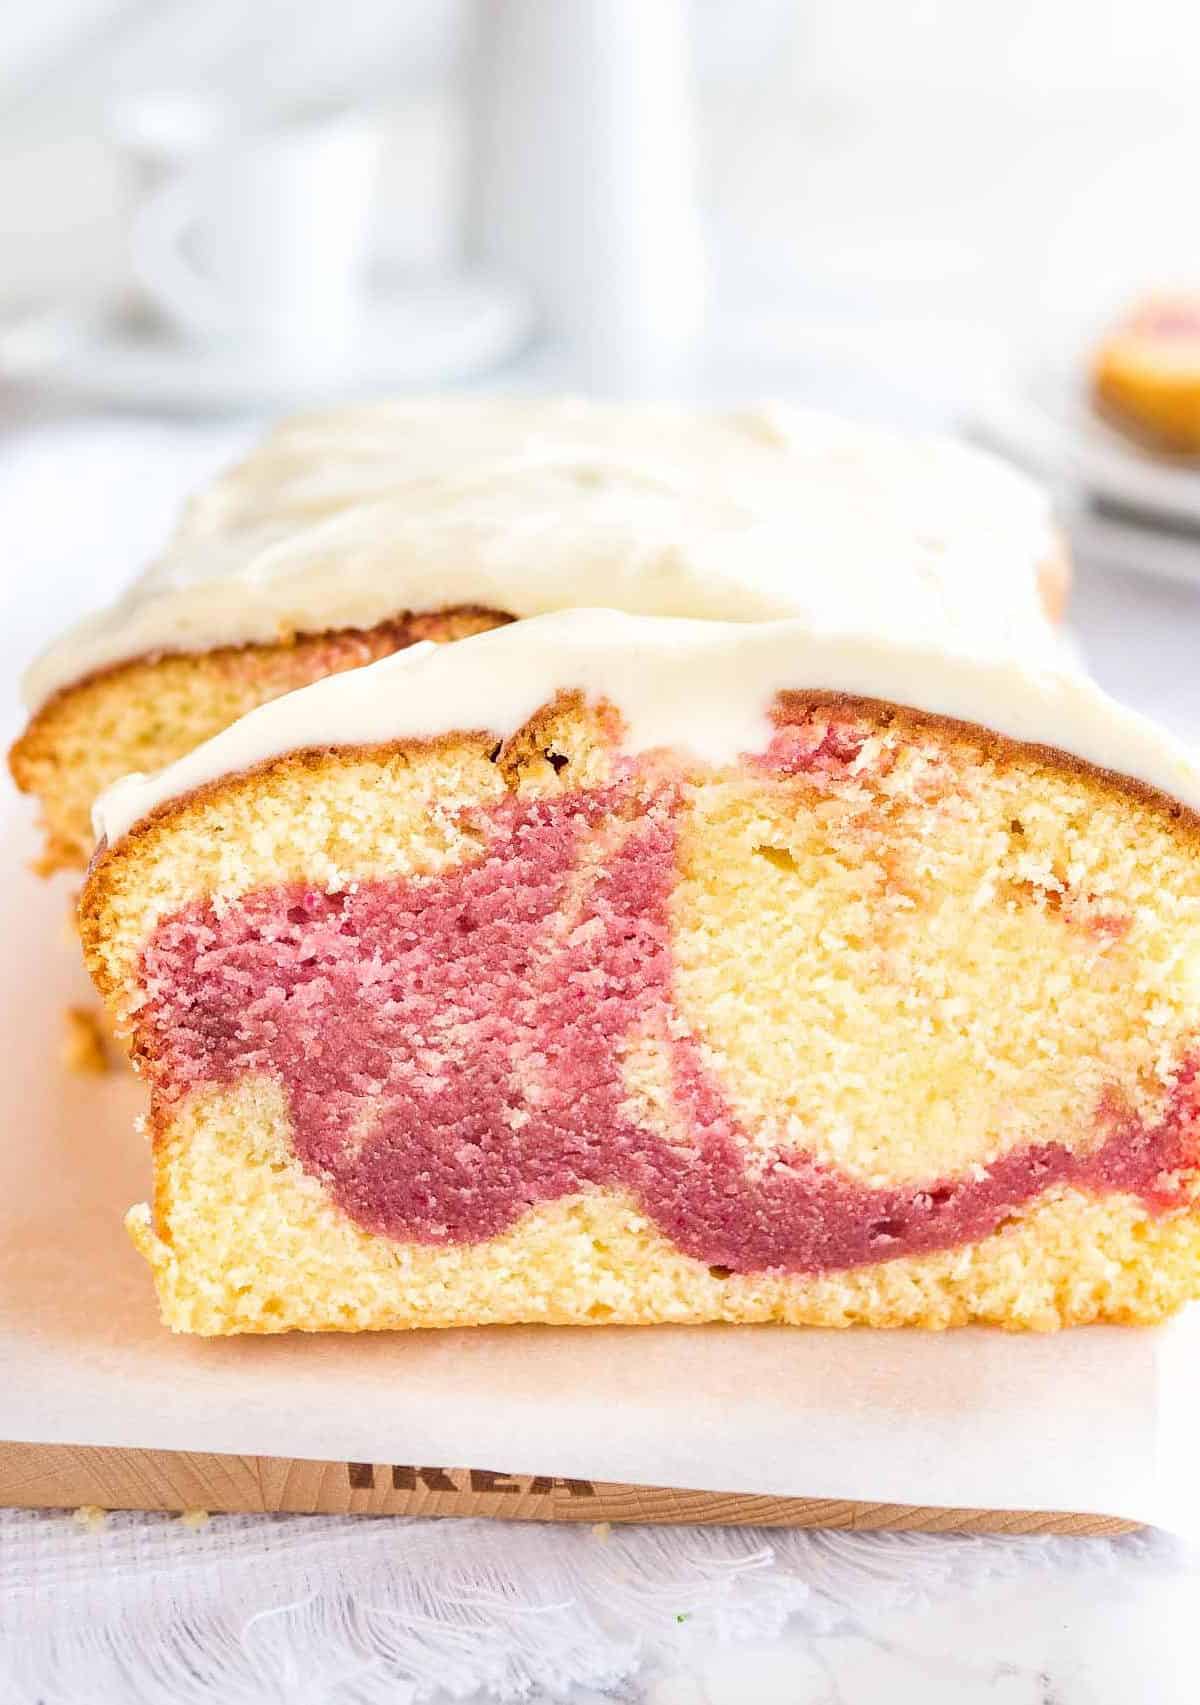  Perfectly golden on top with a beautiful raspberry swirl.